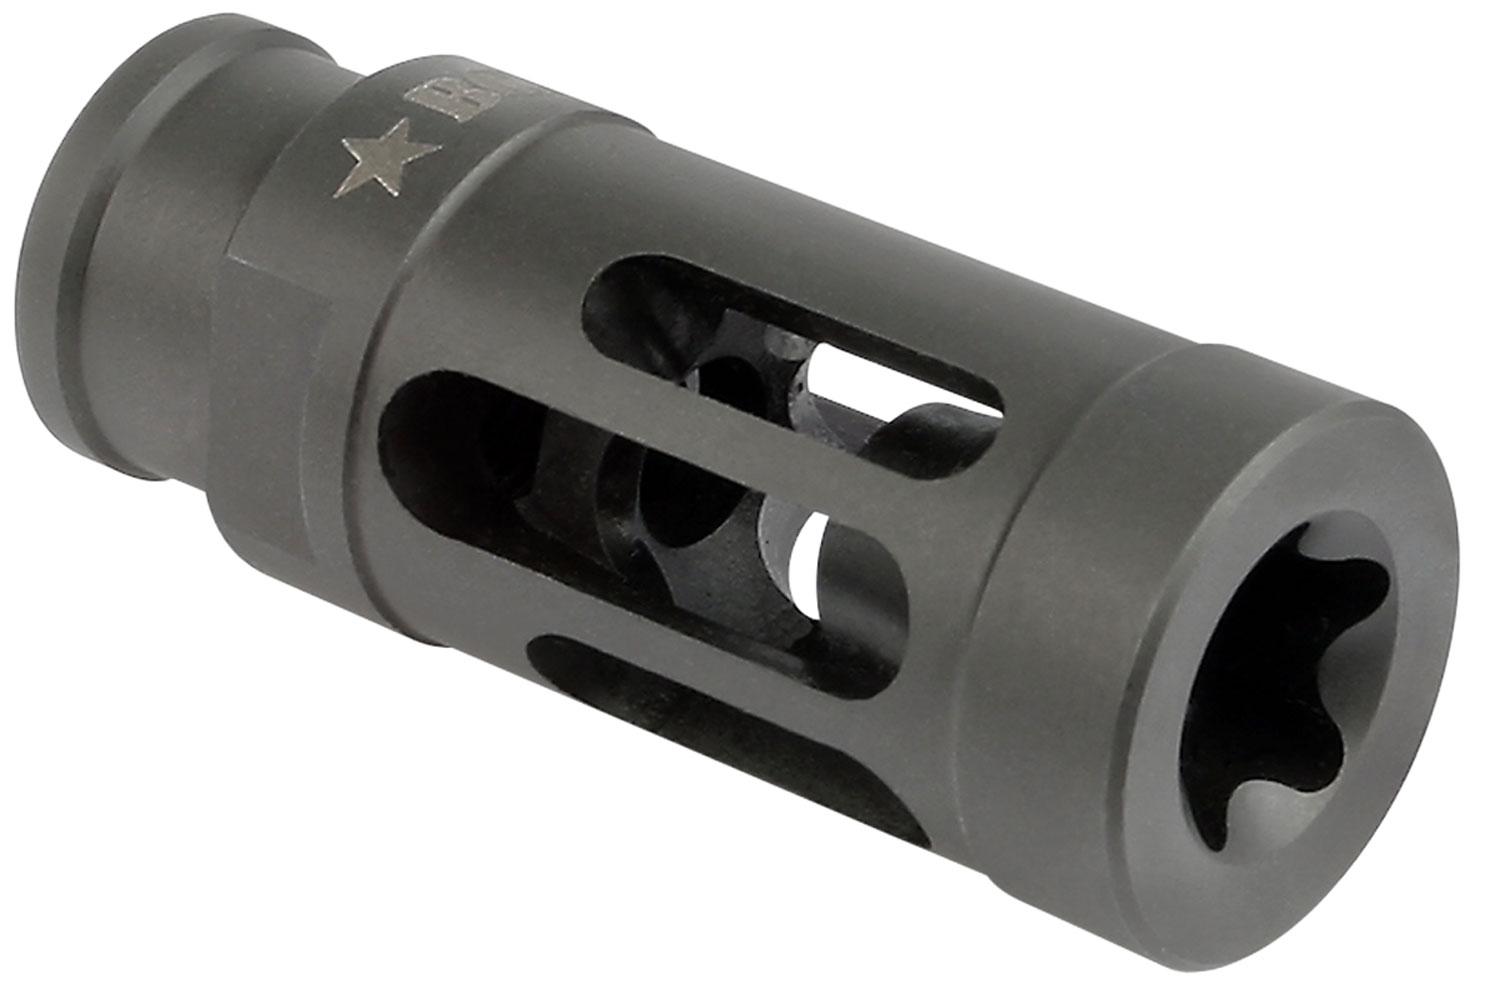 BCM GFCMOD1762 BCMGunfighter Compensator Mod 1 Black Stainless Steel with 5/8